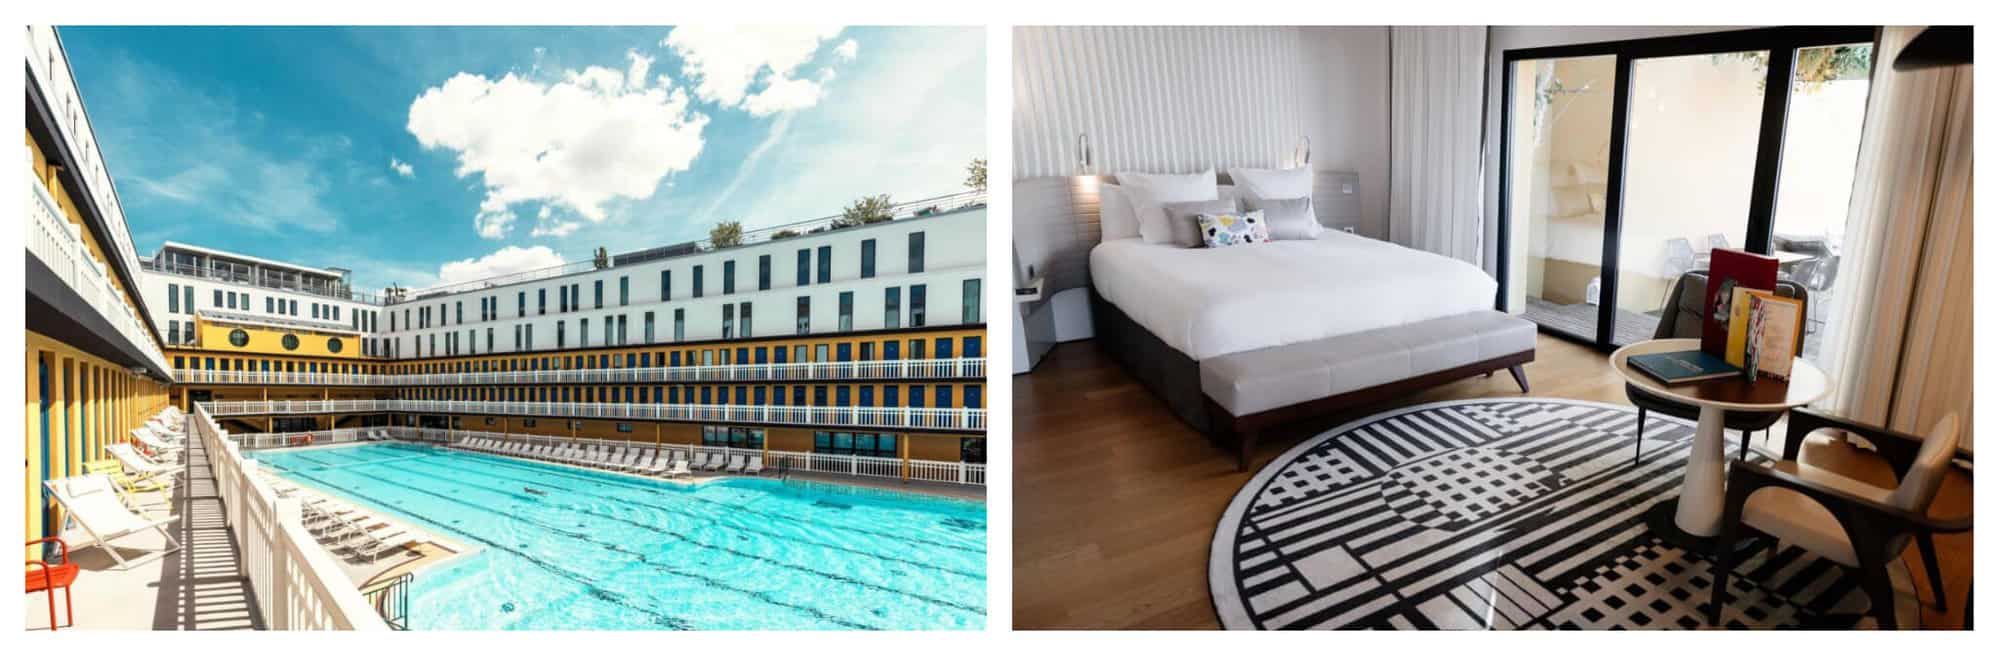 The large turquoise open air pool of Hotel Molitor surrounded by the white and yellow walls of the hotel. A modern executive room decorated in black and white with a balcony.